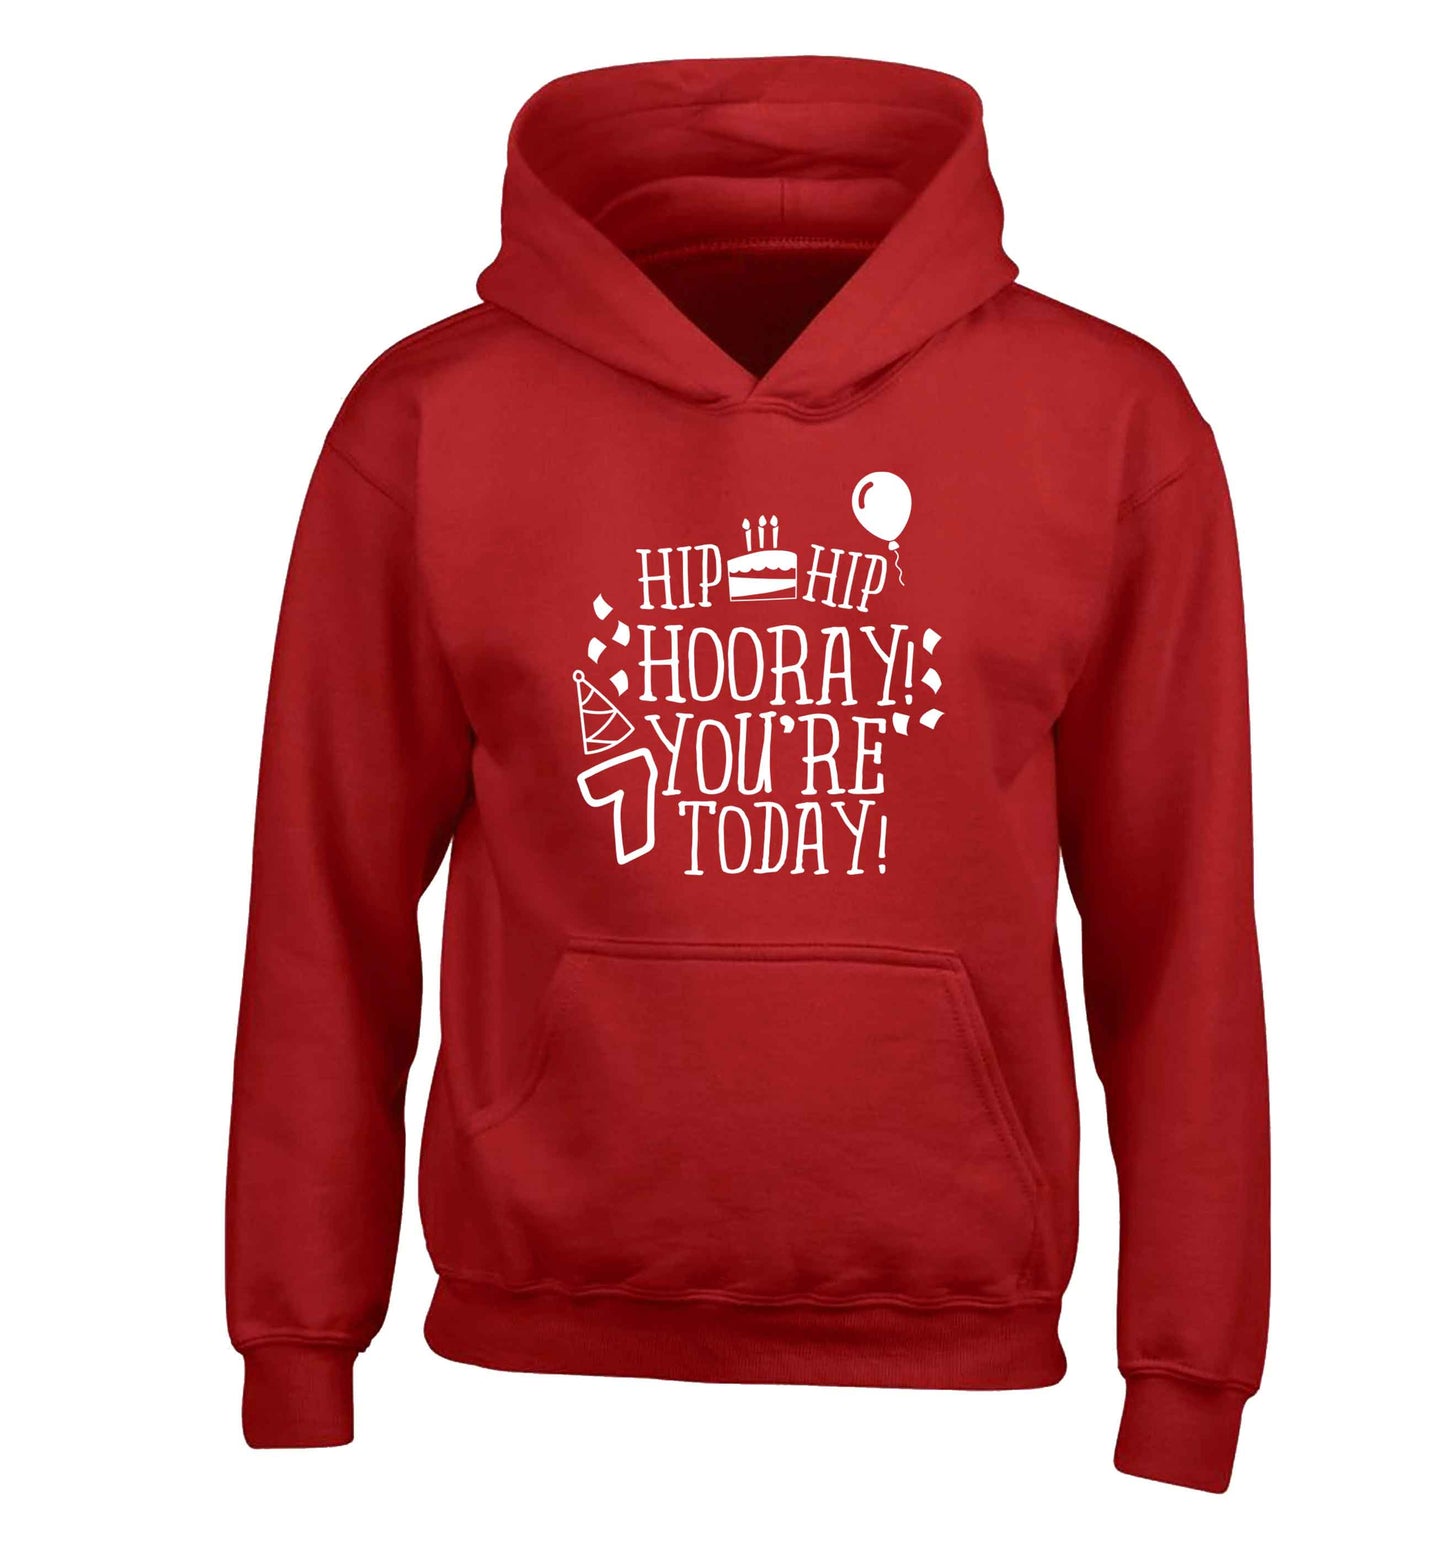 Hip hip hooray you're seven today! children's red hoodie 12-13 Years